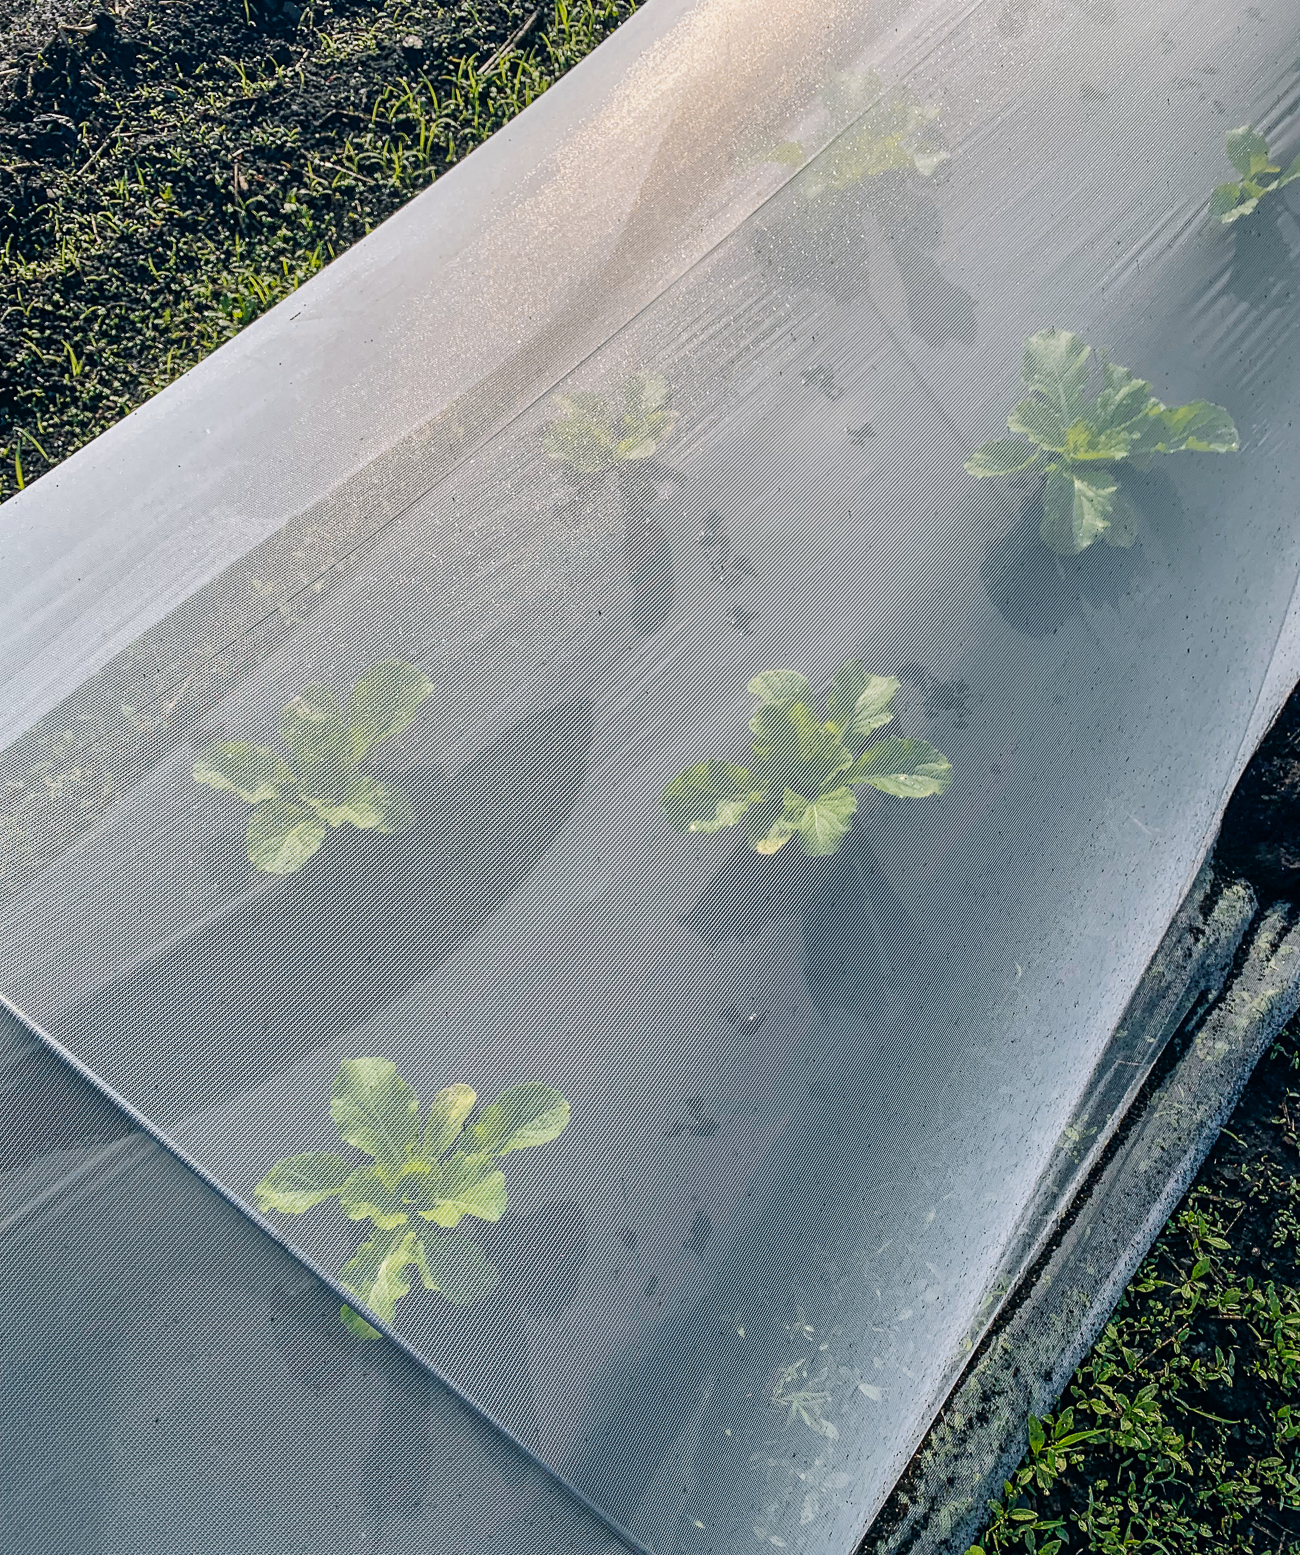 floating row cover over napa cabbage plants